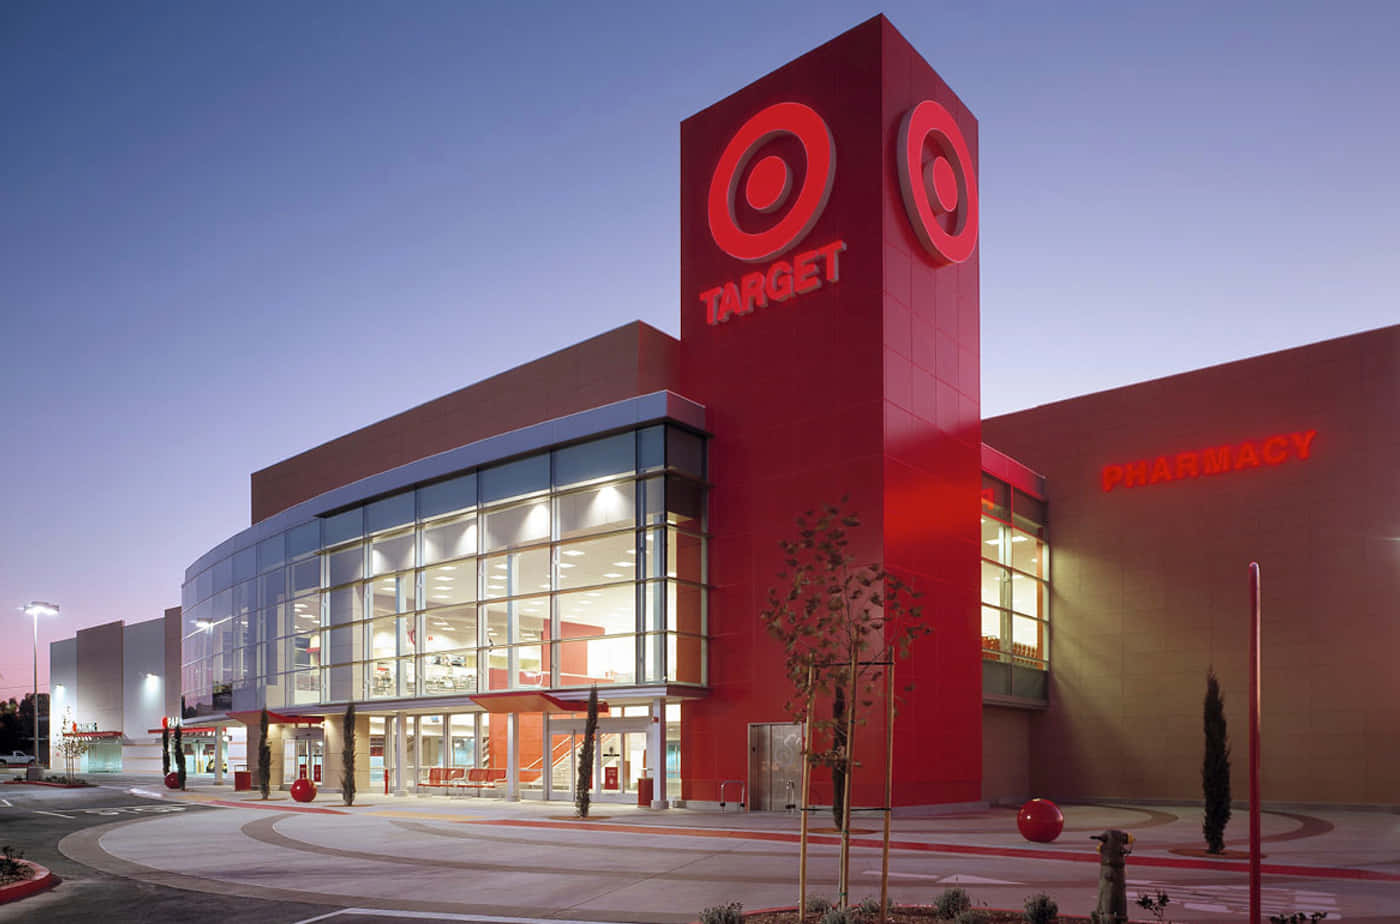 Shop smarter and easier with Target.